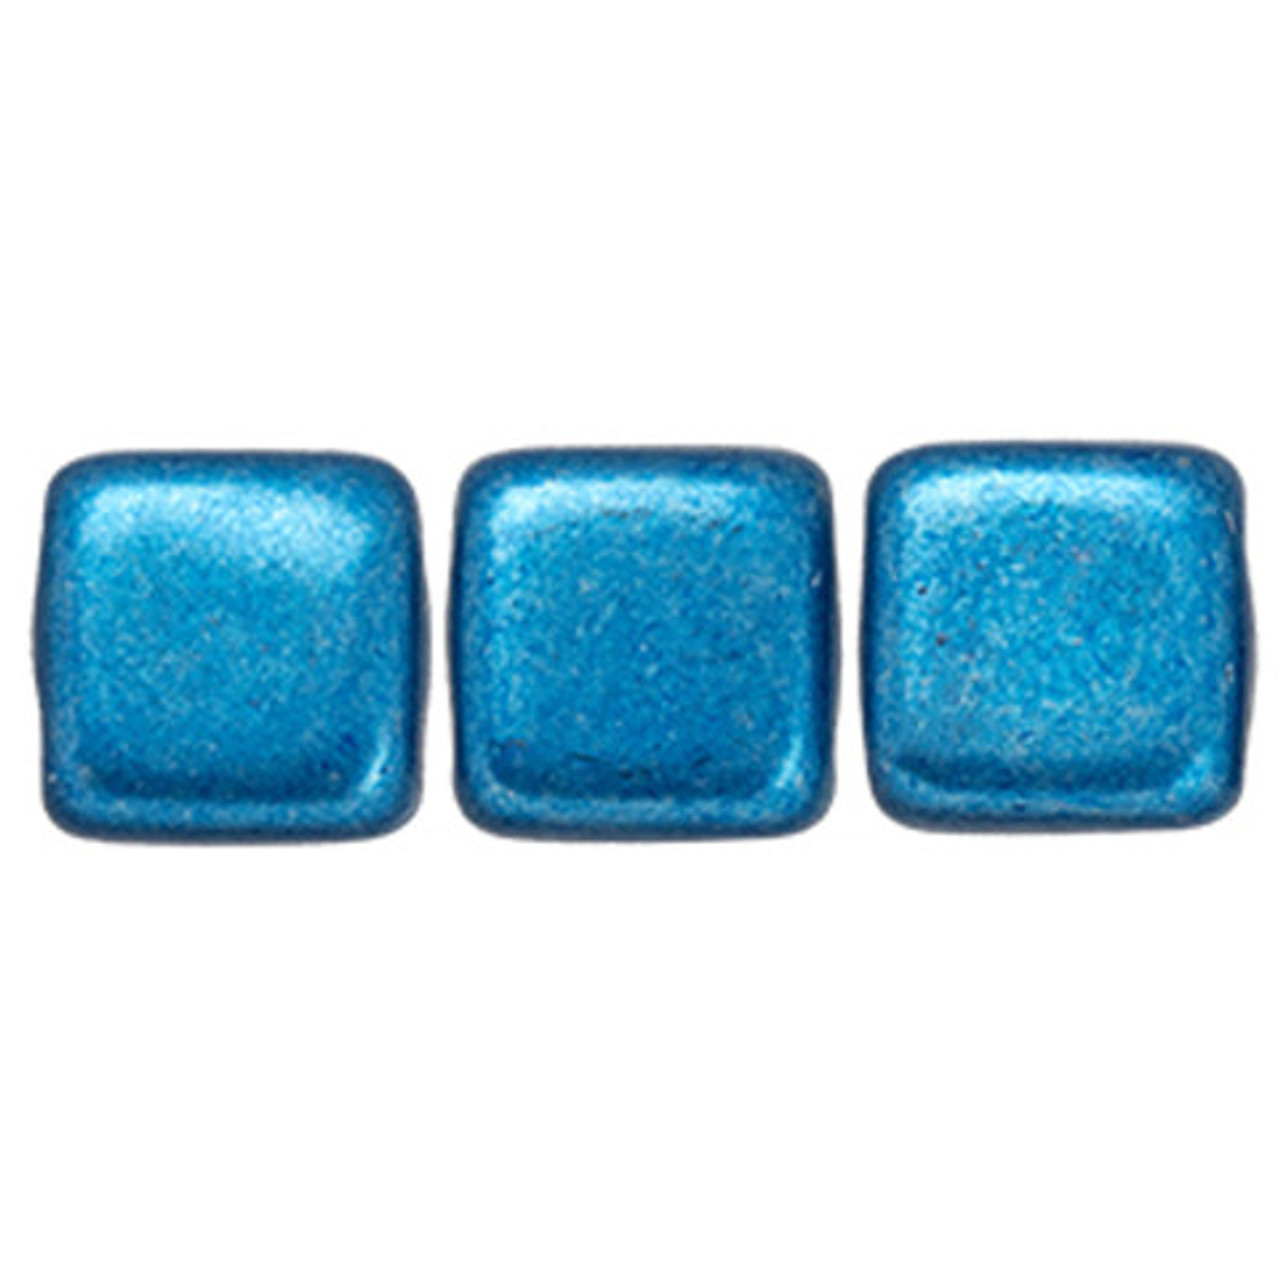 2-Hole TILE Beads 6mm CzechMates SATURATED METALLIC EVENING BLUE (Strand of  50)